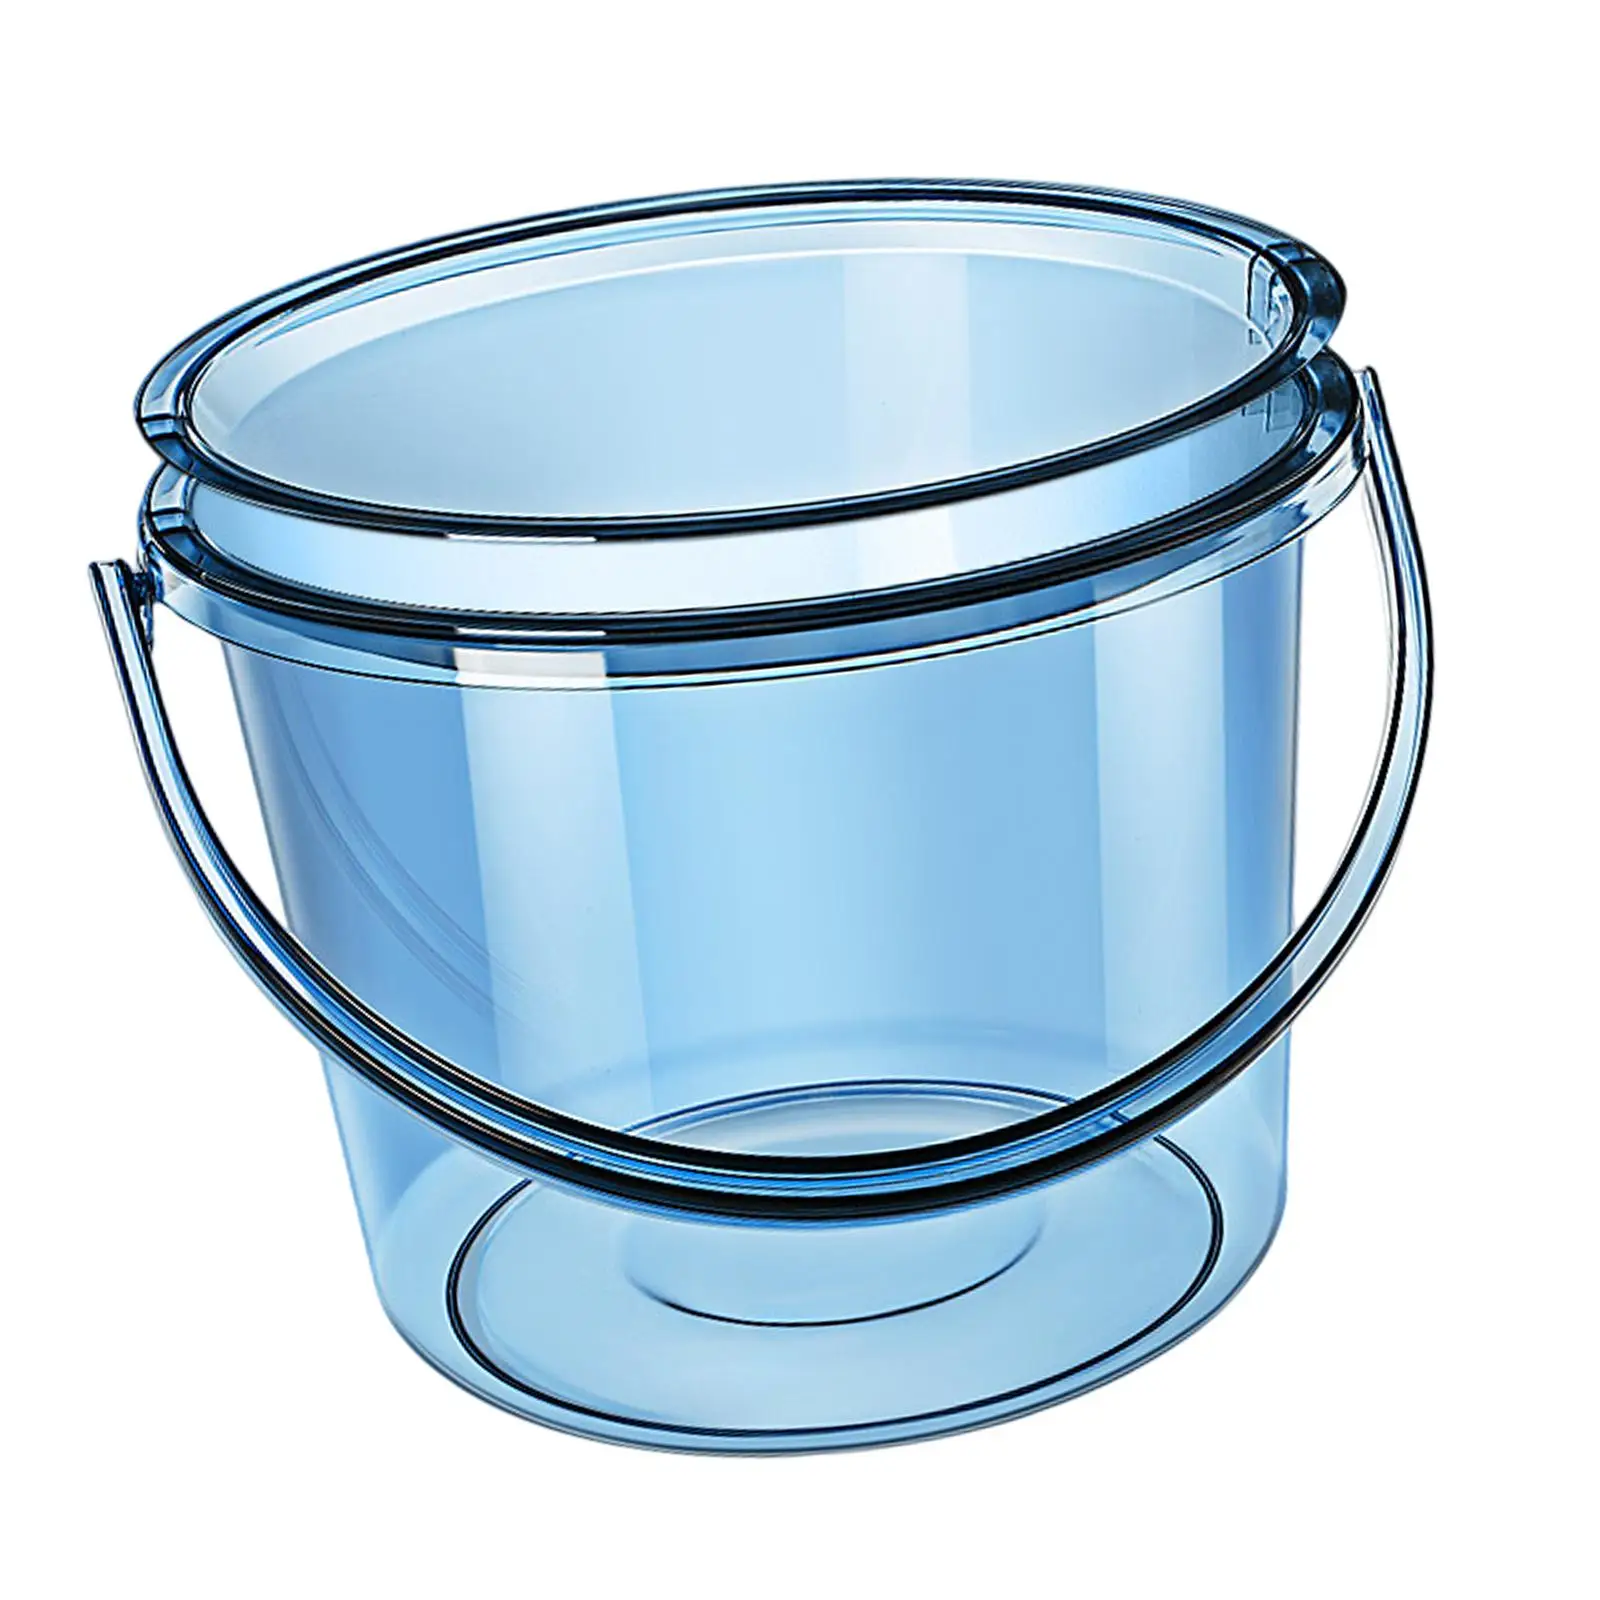 Water Bucket with Lid Portable Multipurpose Cleaning Bucket for Household Use Fishing Bucket for Garden Camping Fishing Outdoor